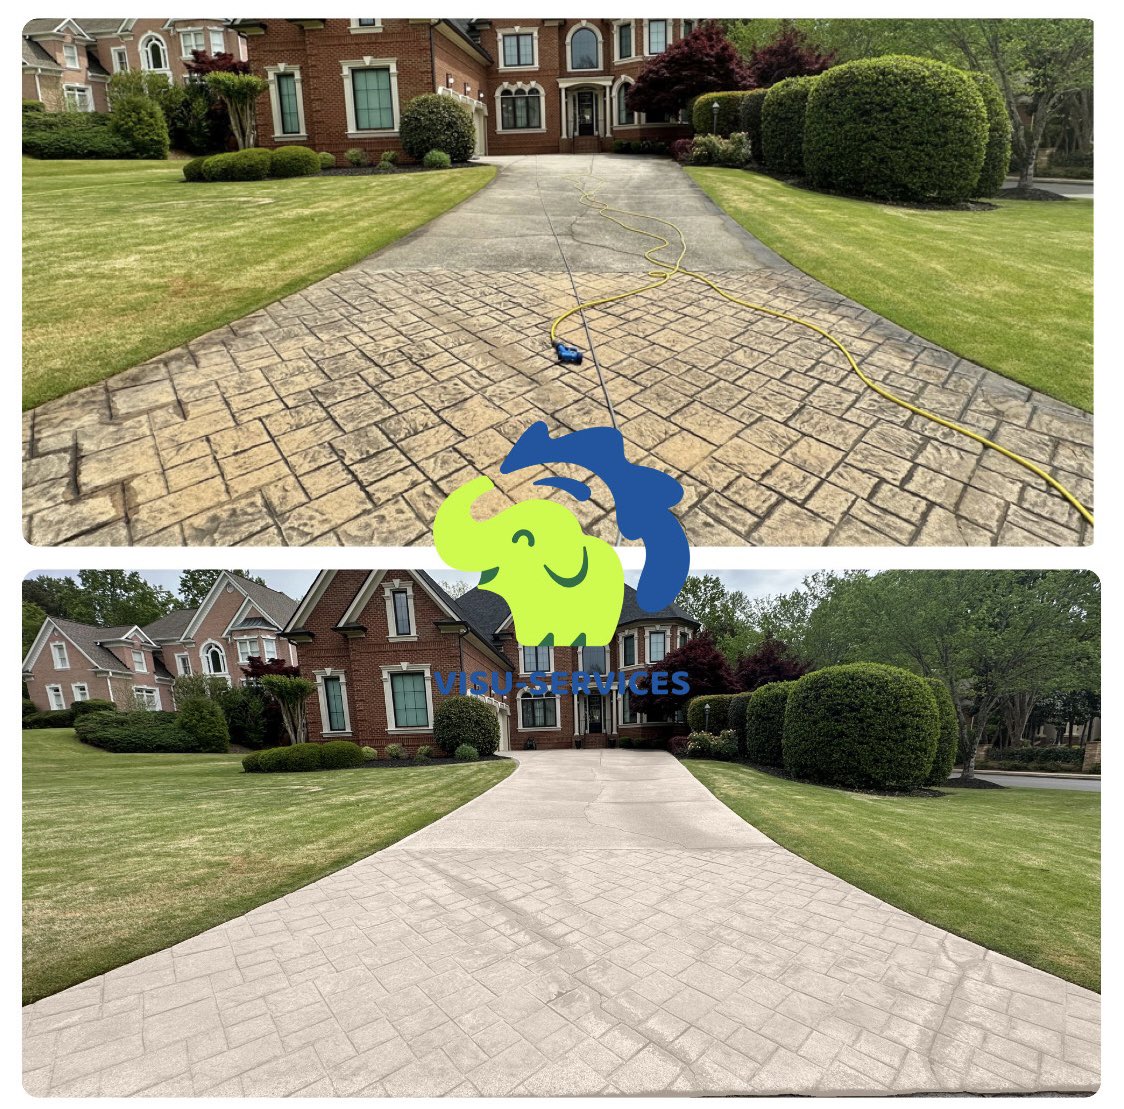 Check out this before and after of one of our recent jobs! Look at the difference a pressure washing job can do for your property! 

💦Get your FREE pressure washing estimate today!

#pressurewash #pressurewashingservices #cleaningservices #softwashing #alpharetta #georgia